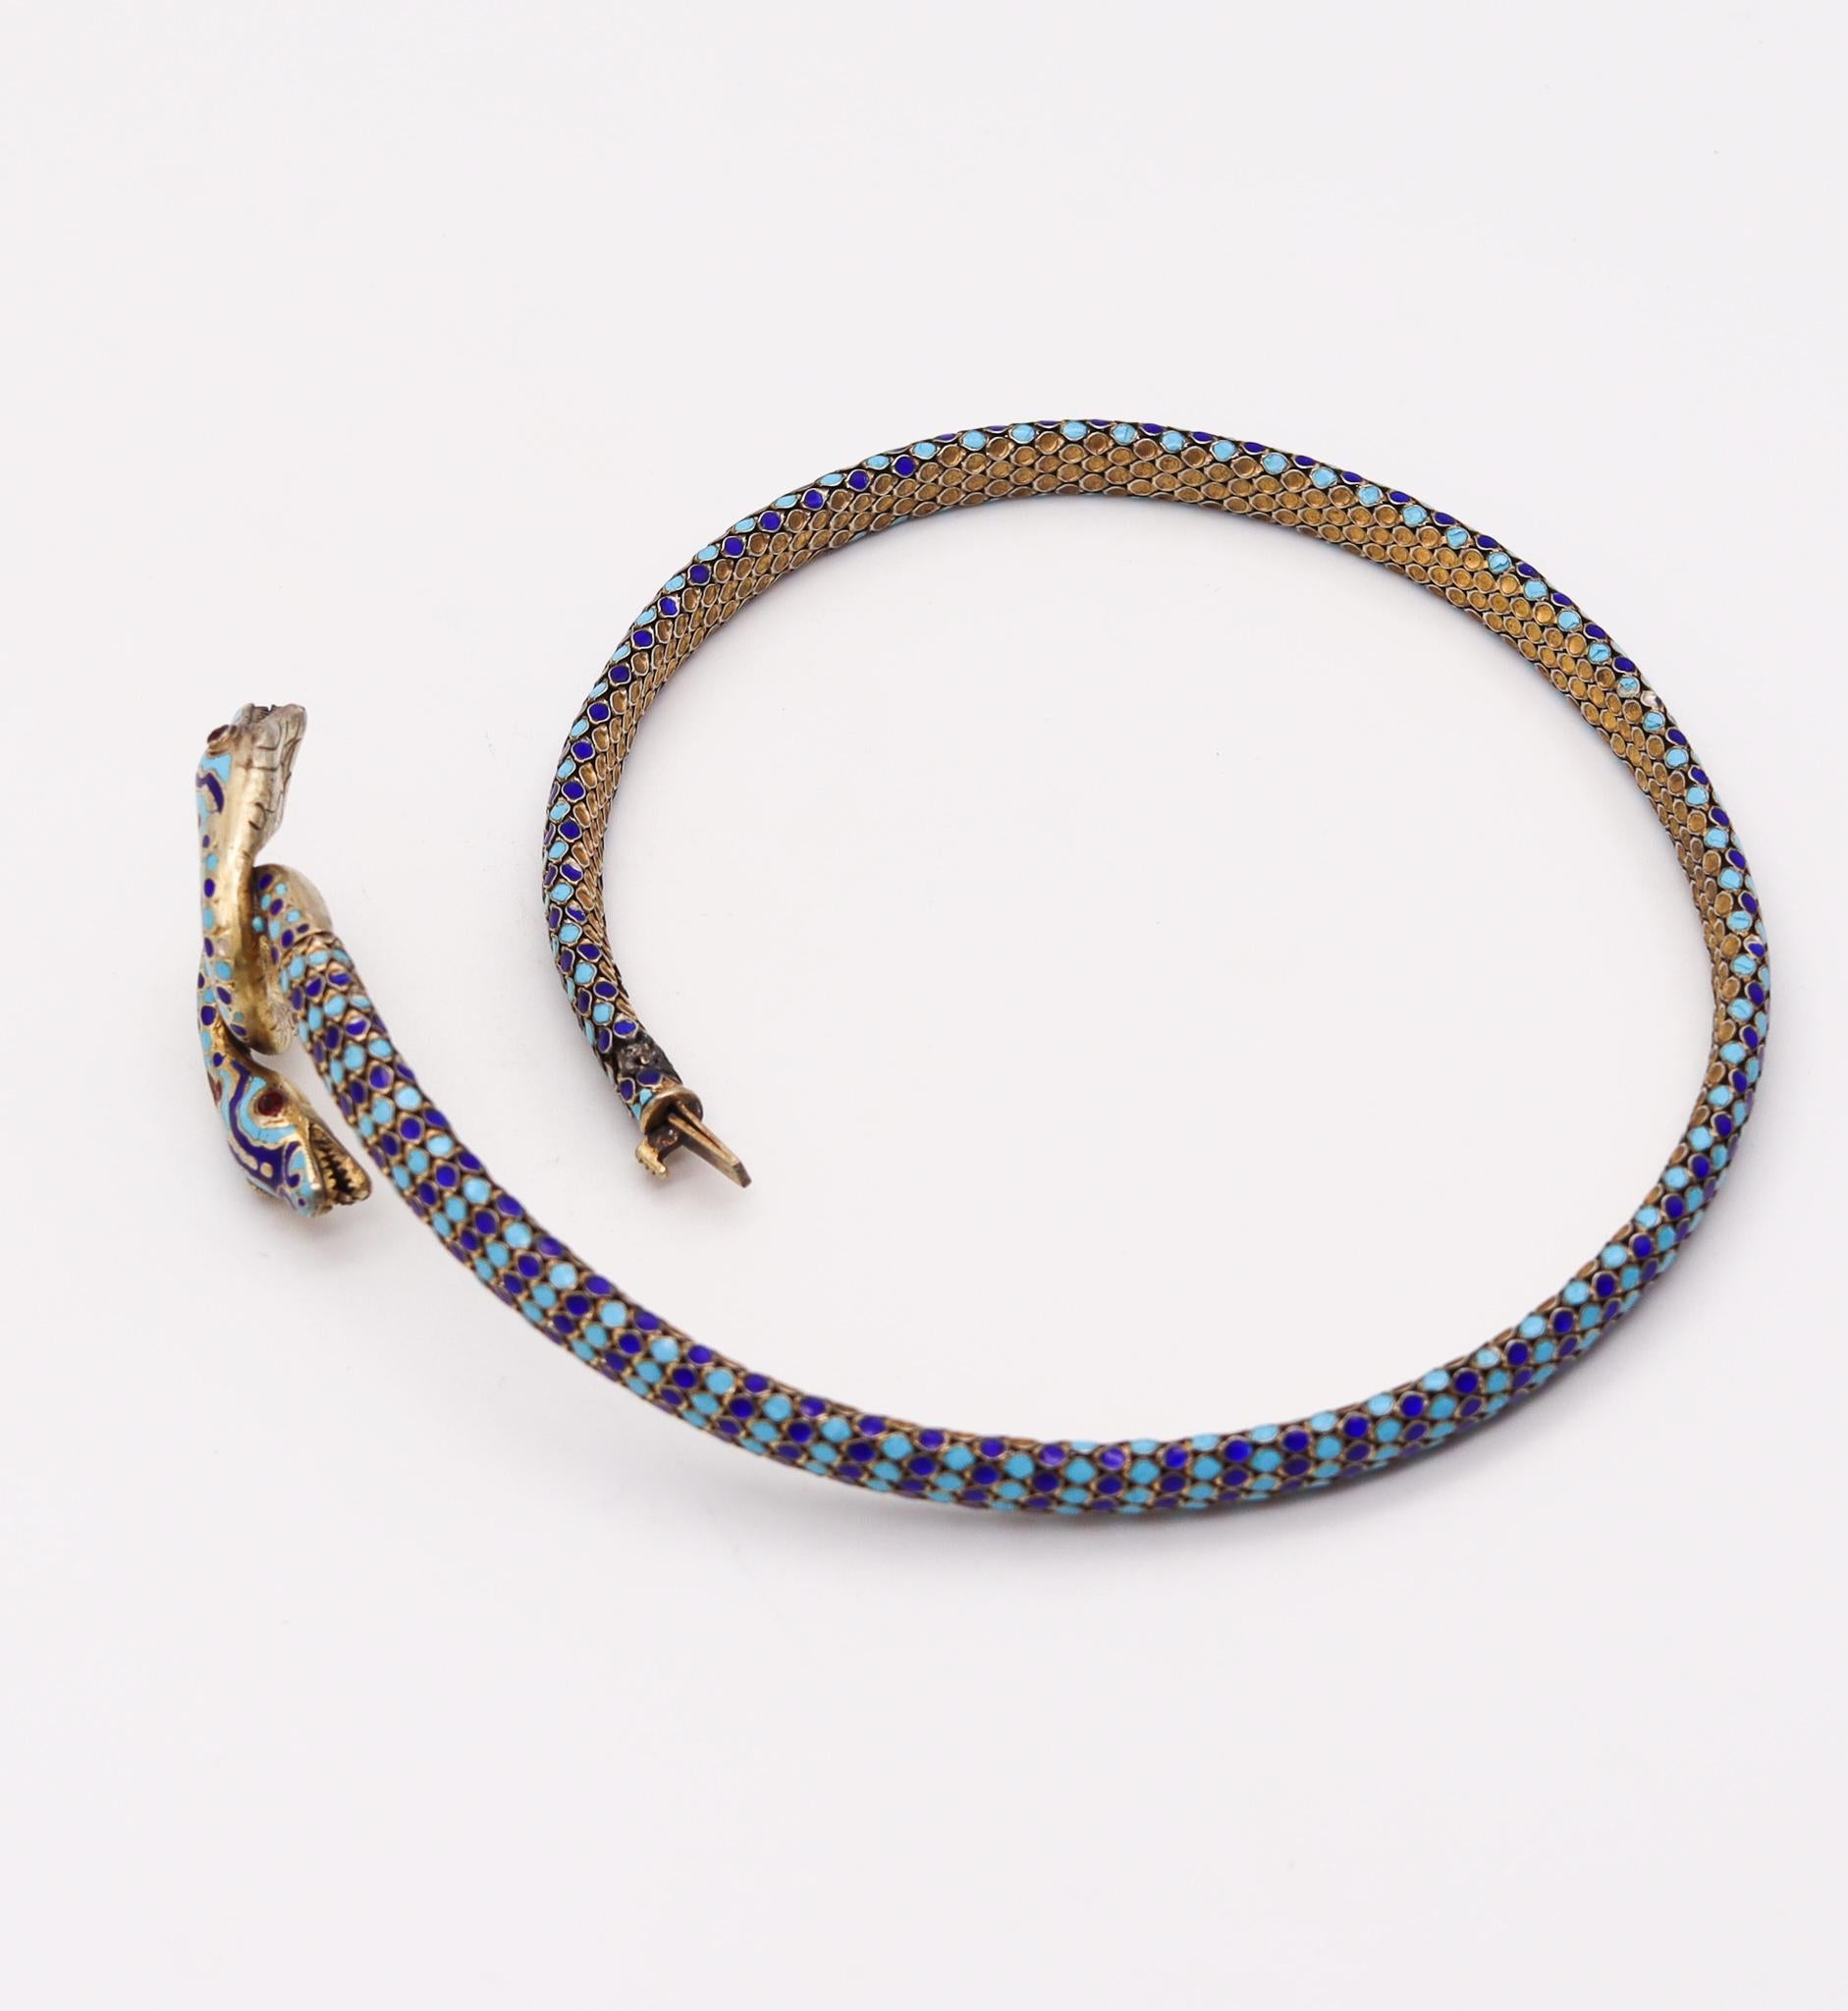 French 1880 Egyptian Revival Snakes Necklace in Silver with Champleve Cloisonné For Sale 3